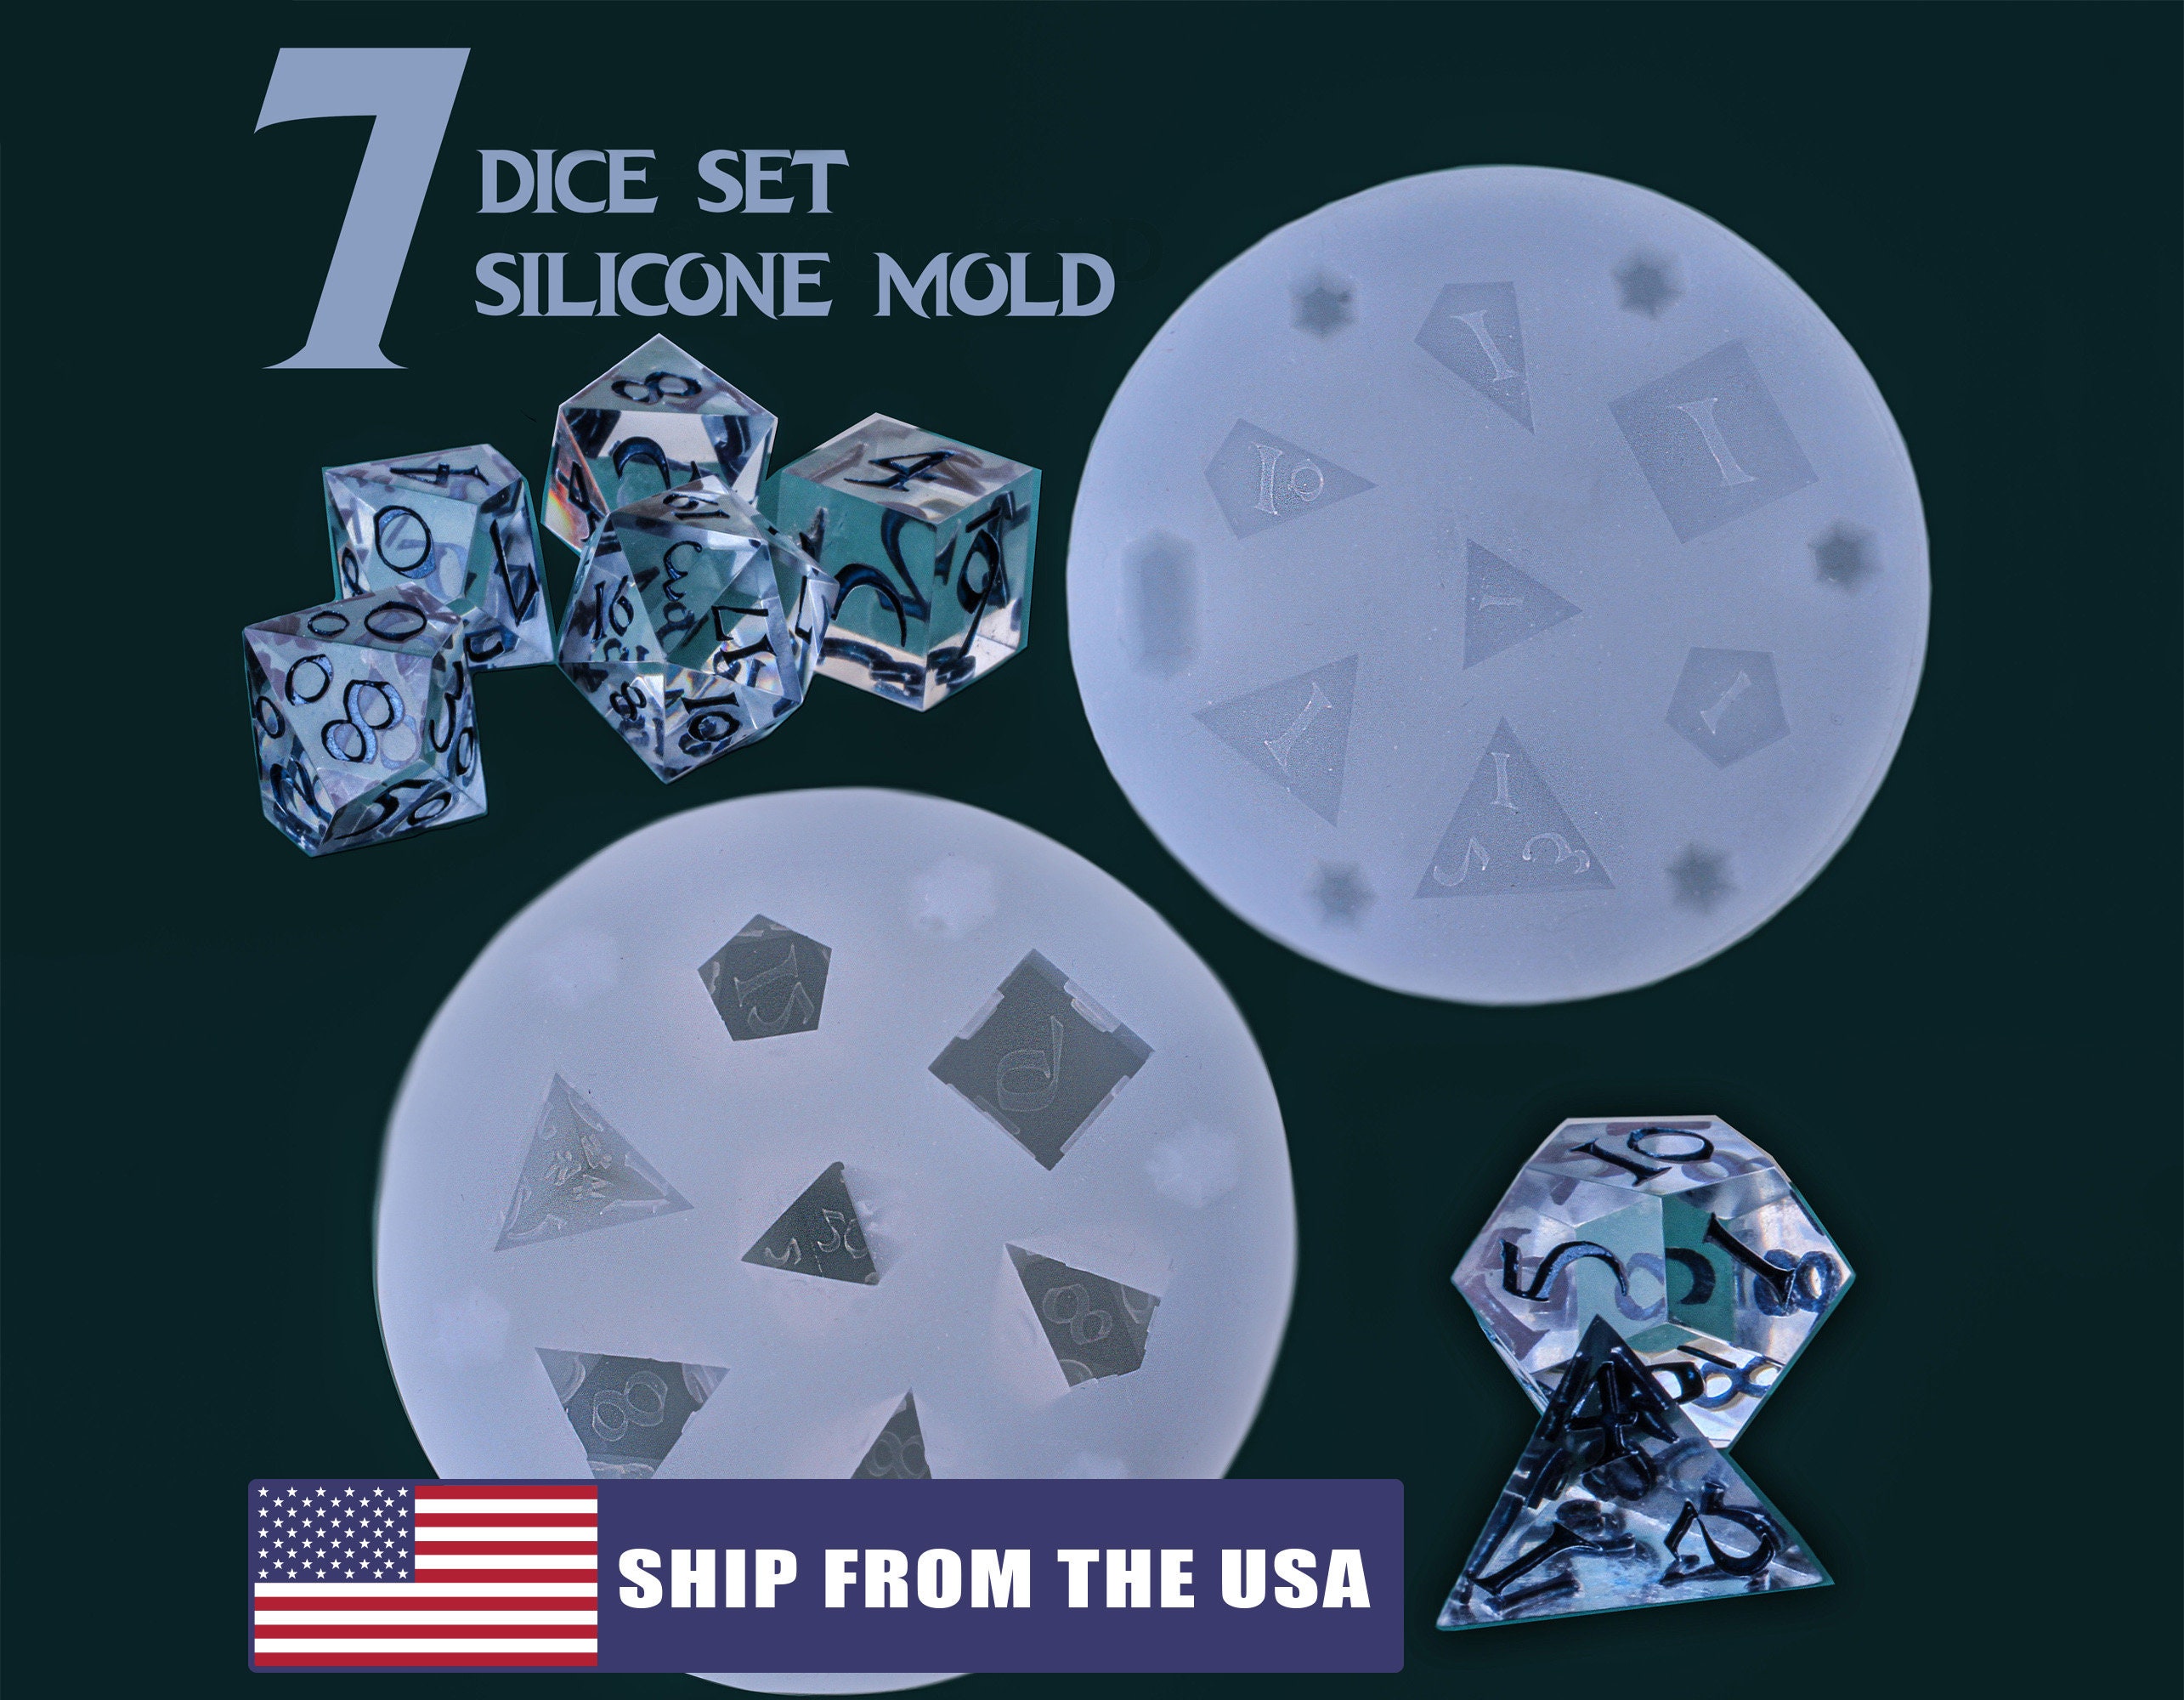 DND Dice Mold Silicone 7 Standard Polyhedral Sharp Edge Dice Slab Mould for  D&D, Tabletop RPG - CZYY